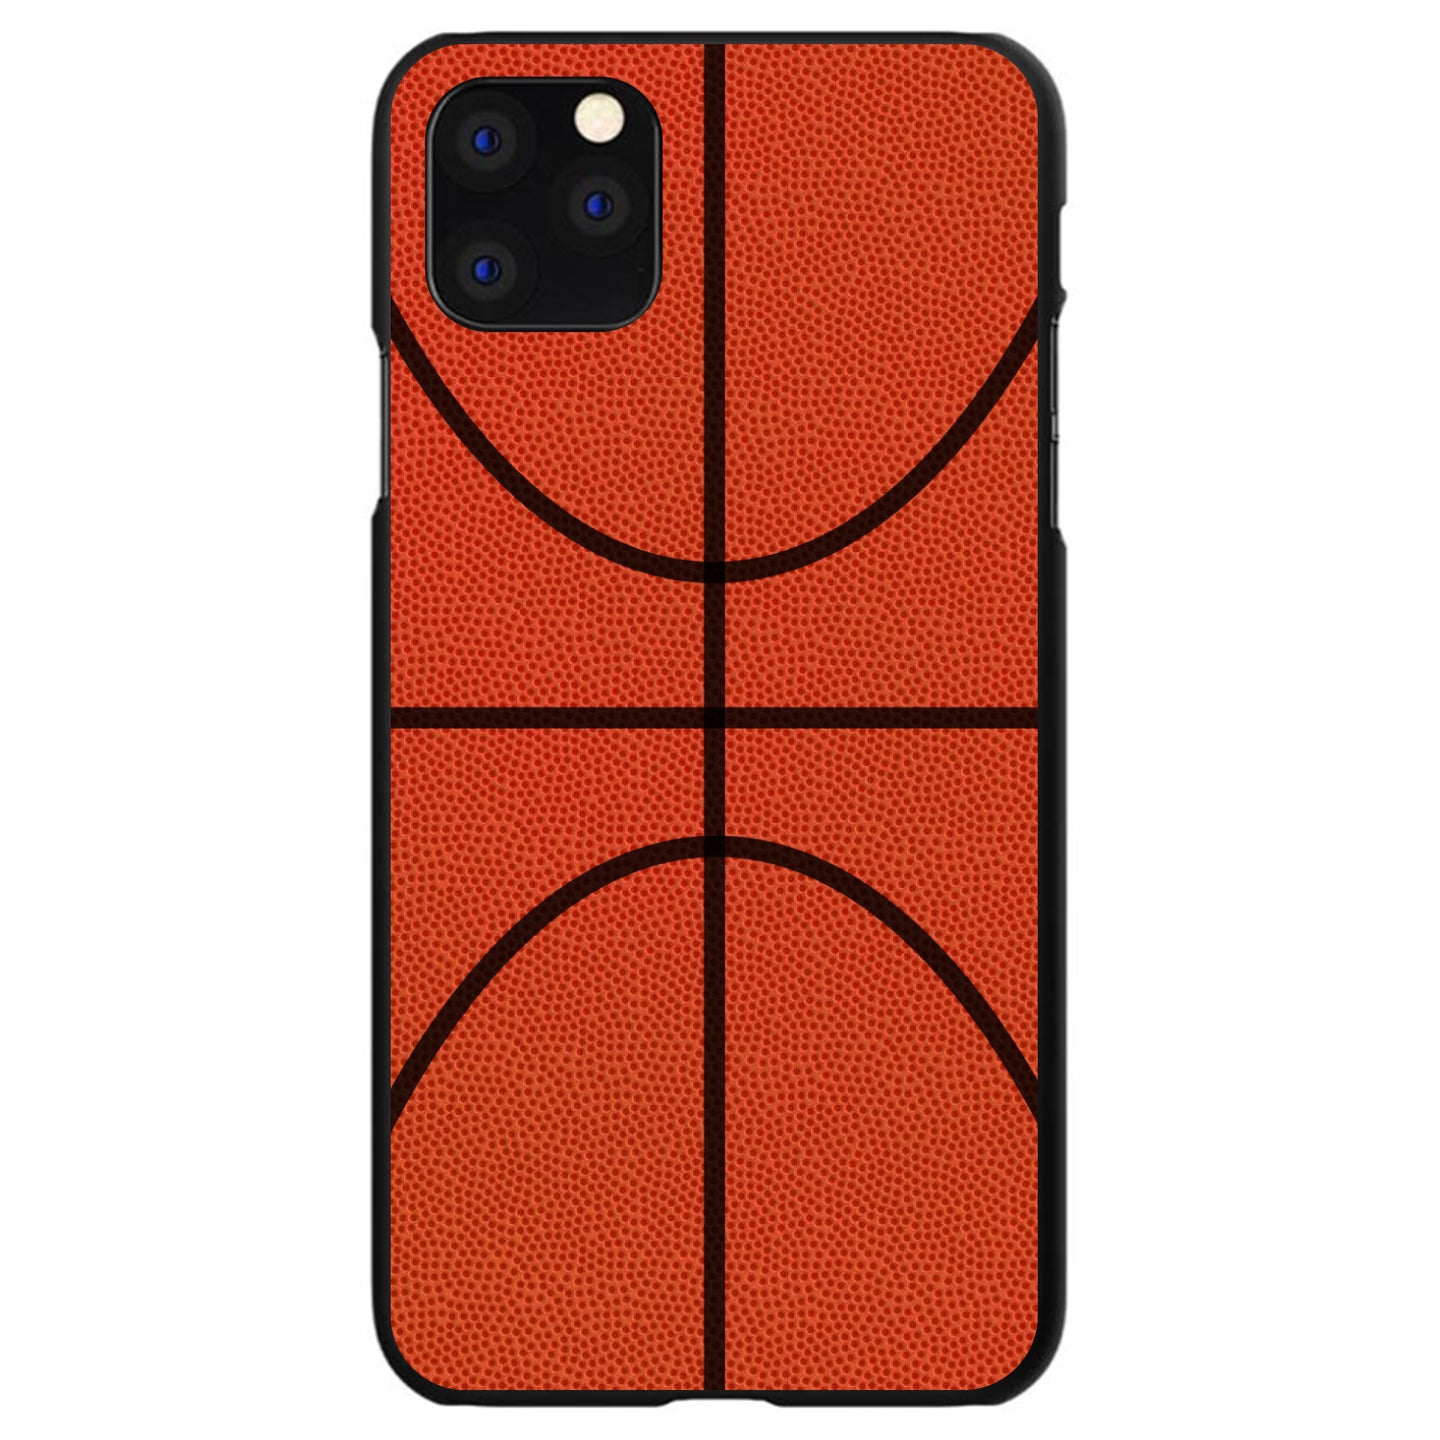 DistinctInk® Hard Plastic Snap-On Case for Apple iPhone or Samsung Galaxy - Basketball Drawing